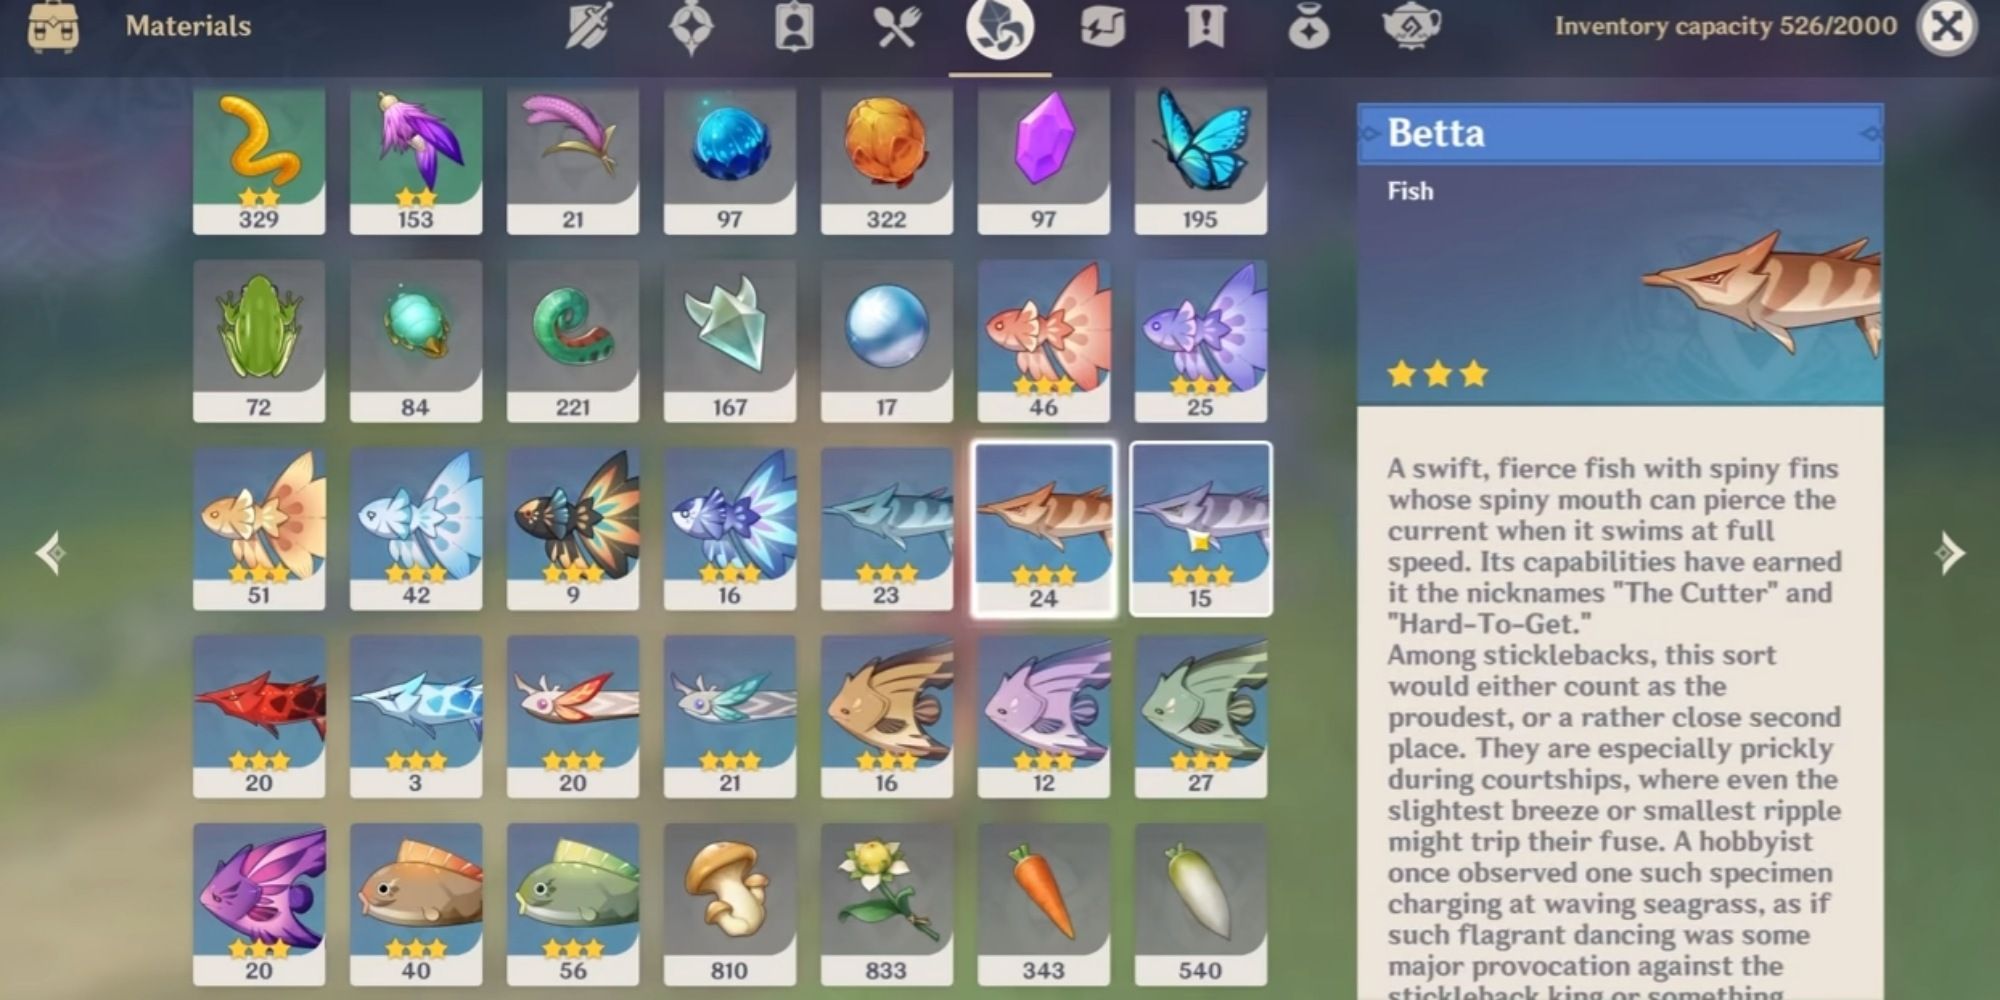 Fish collected in the inventory